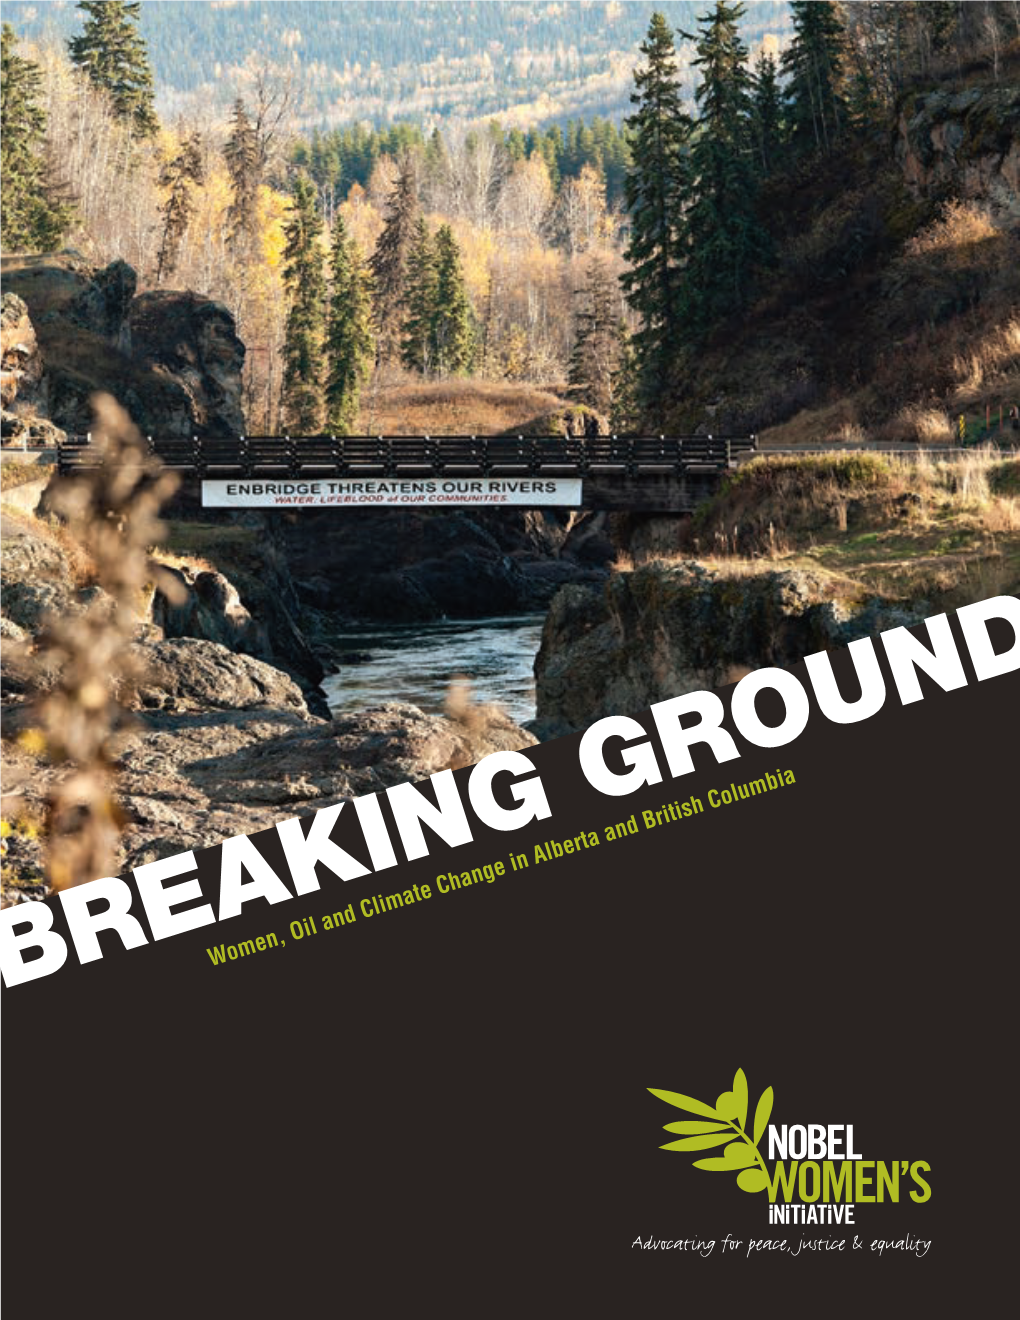 BREAKING GROUND Women, Oil and Climate Change in Alberta and British Columbia